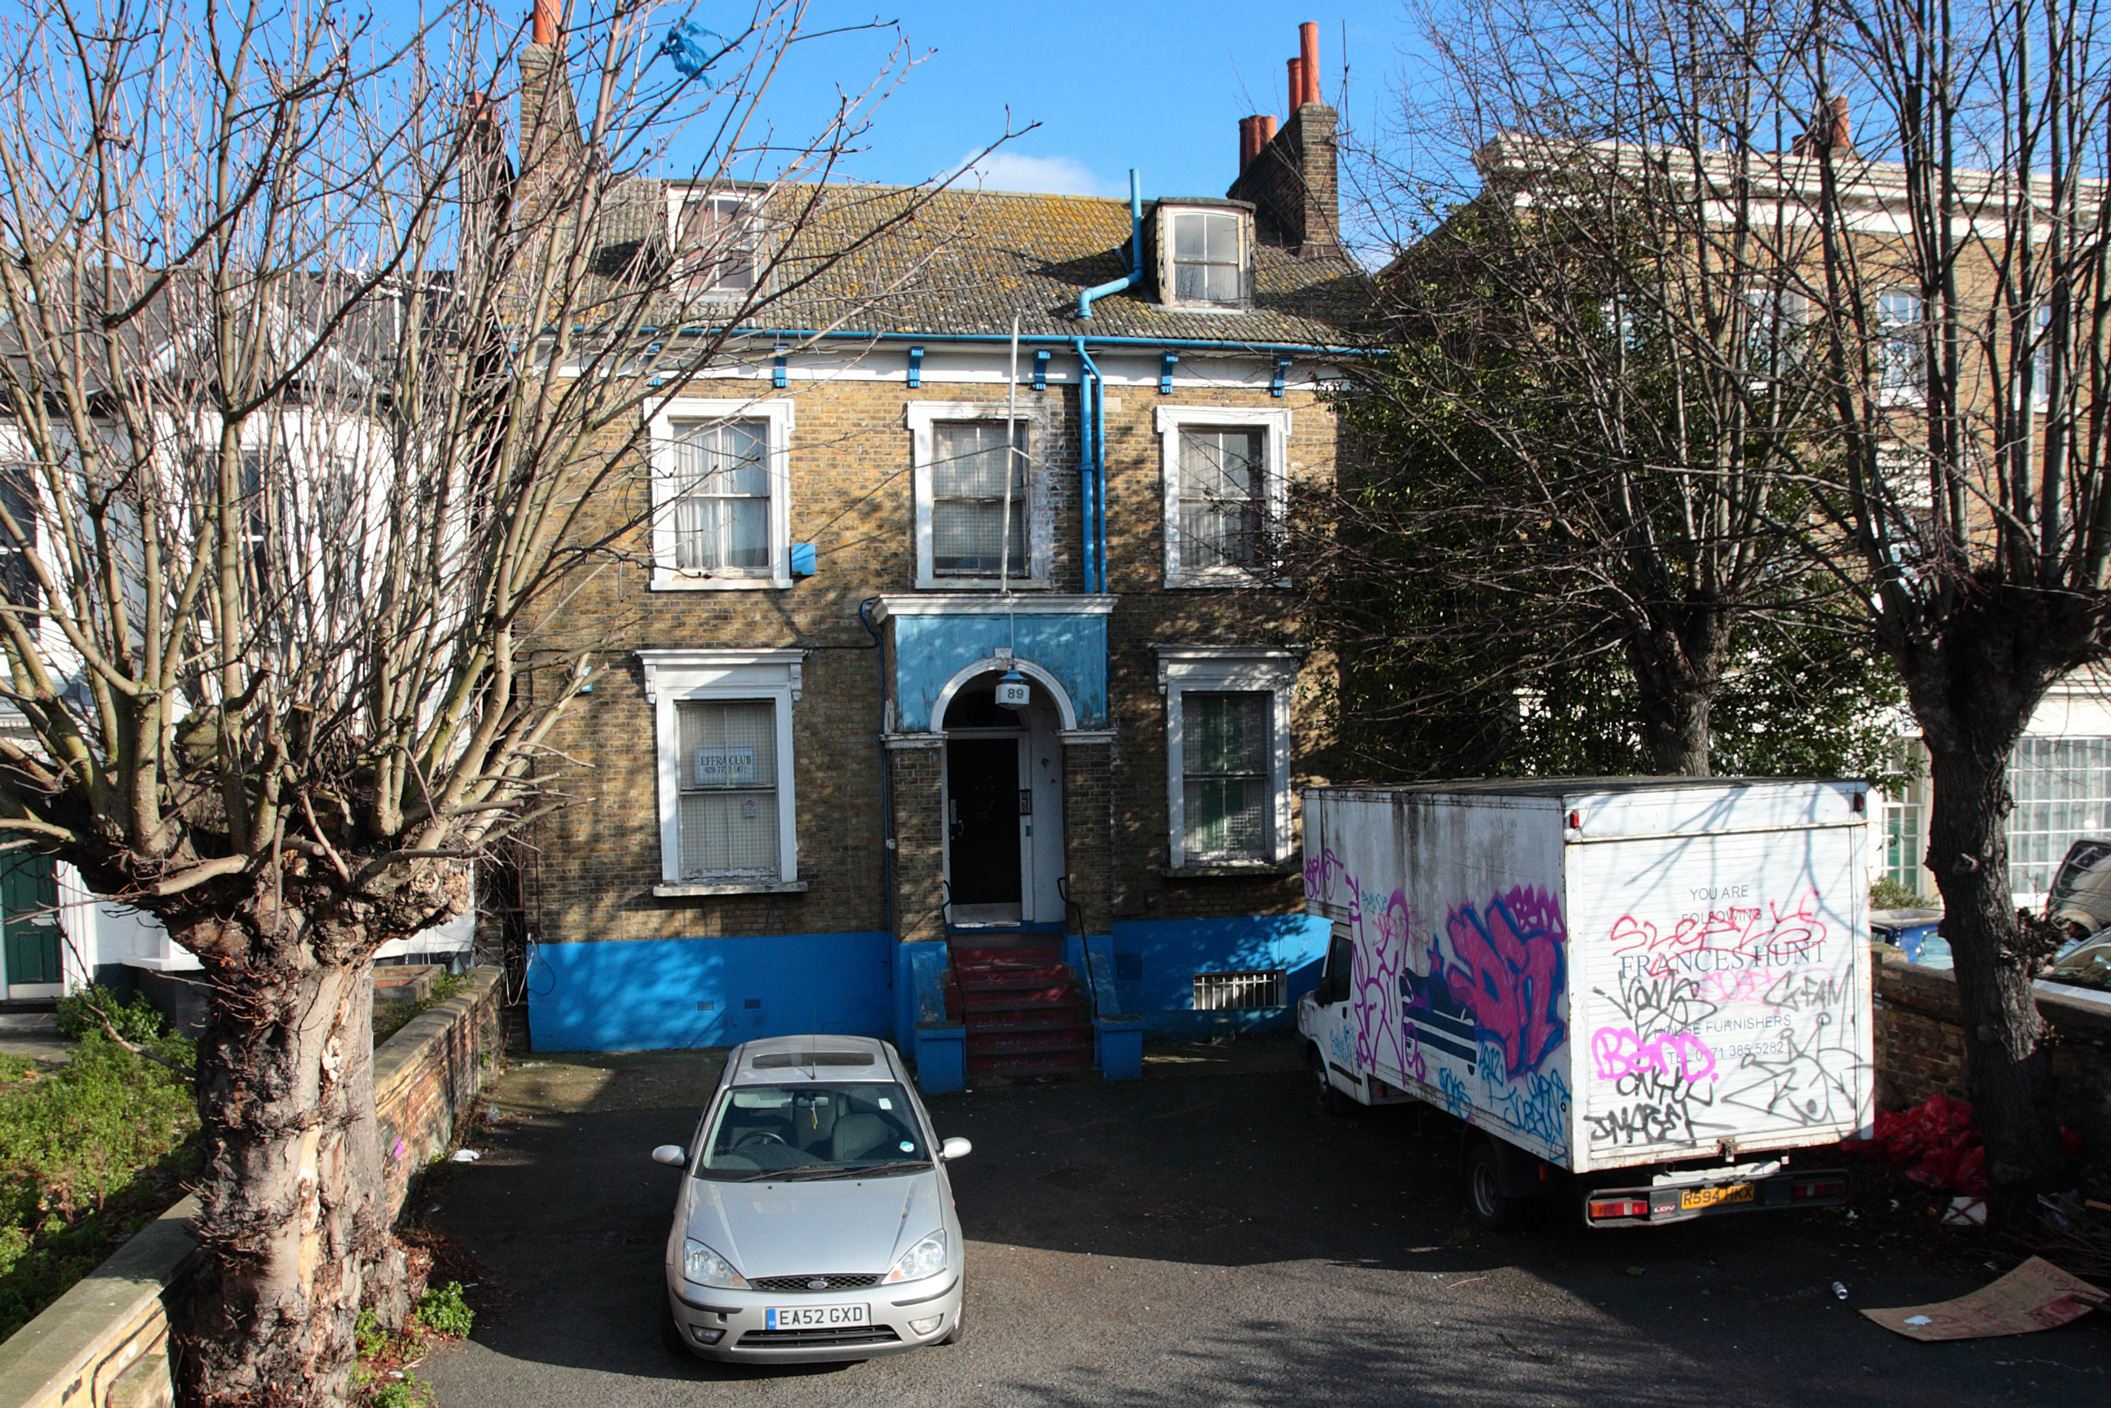 Tenanted Conservative Club. Acquired unconditionally for residential conversion. Effra Road, SW2, London Borough of Lambeth.